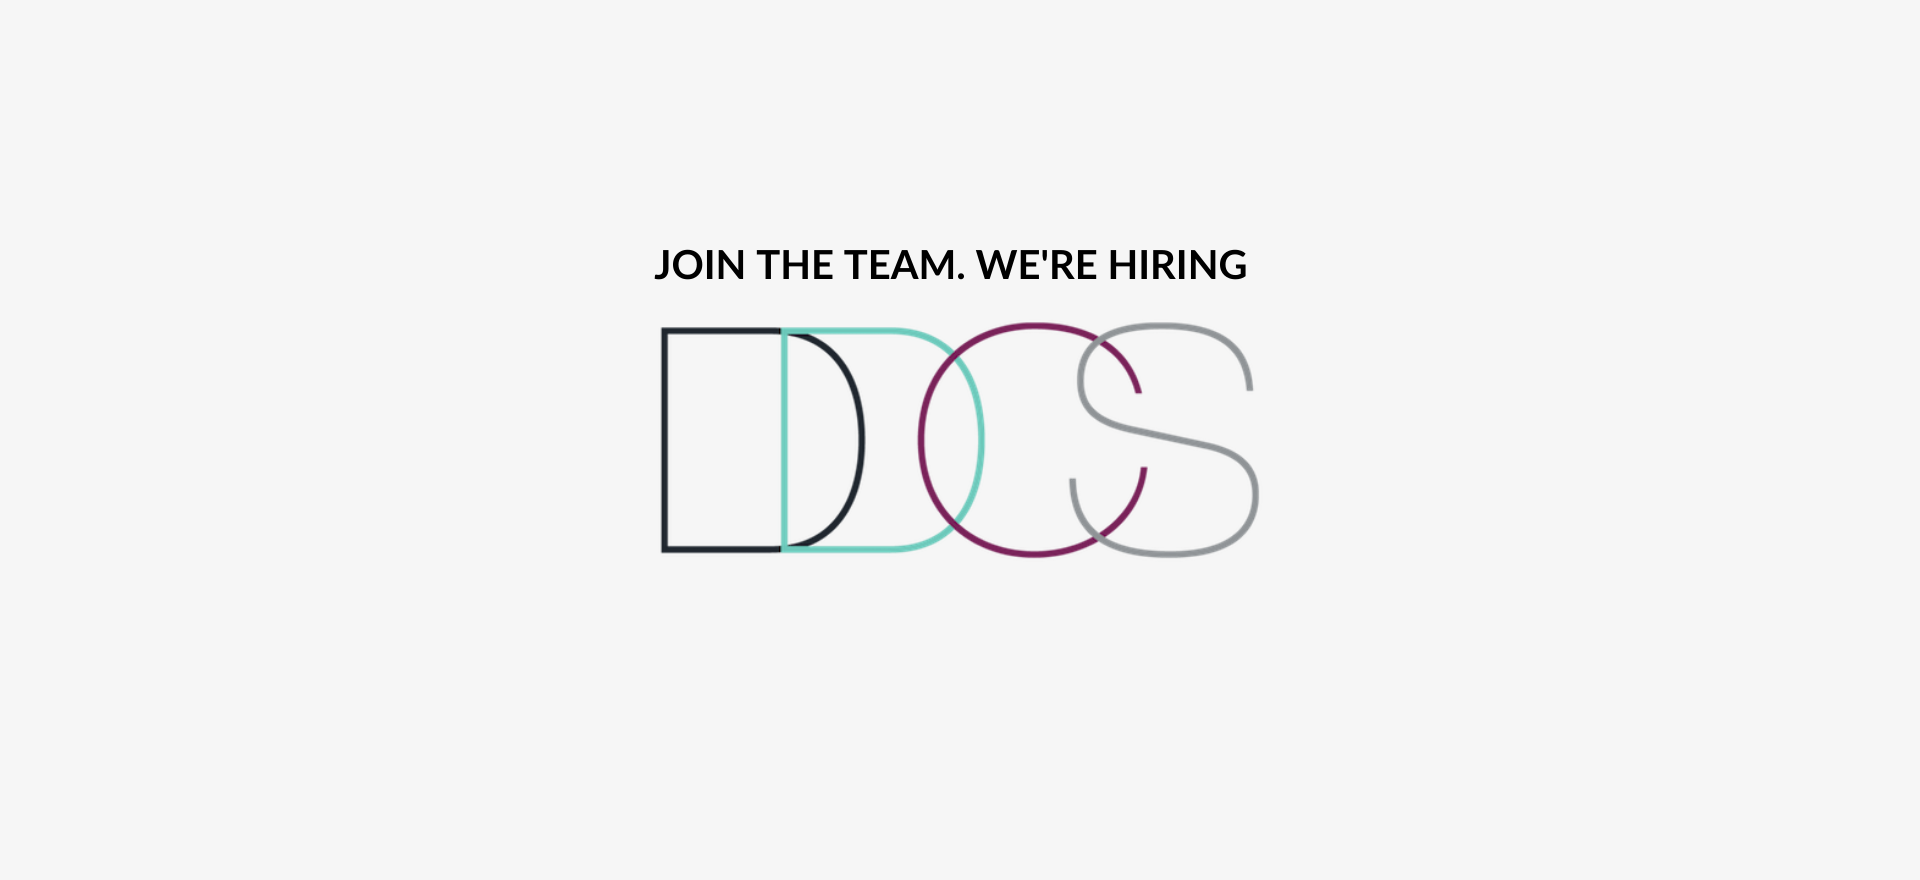 DDCS logo with words join the team and we're hiring